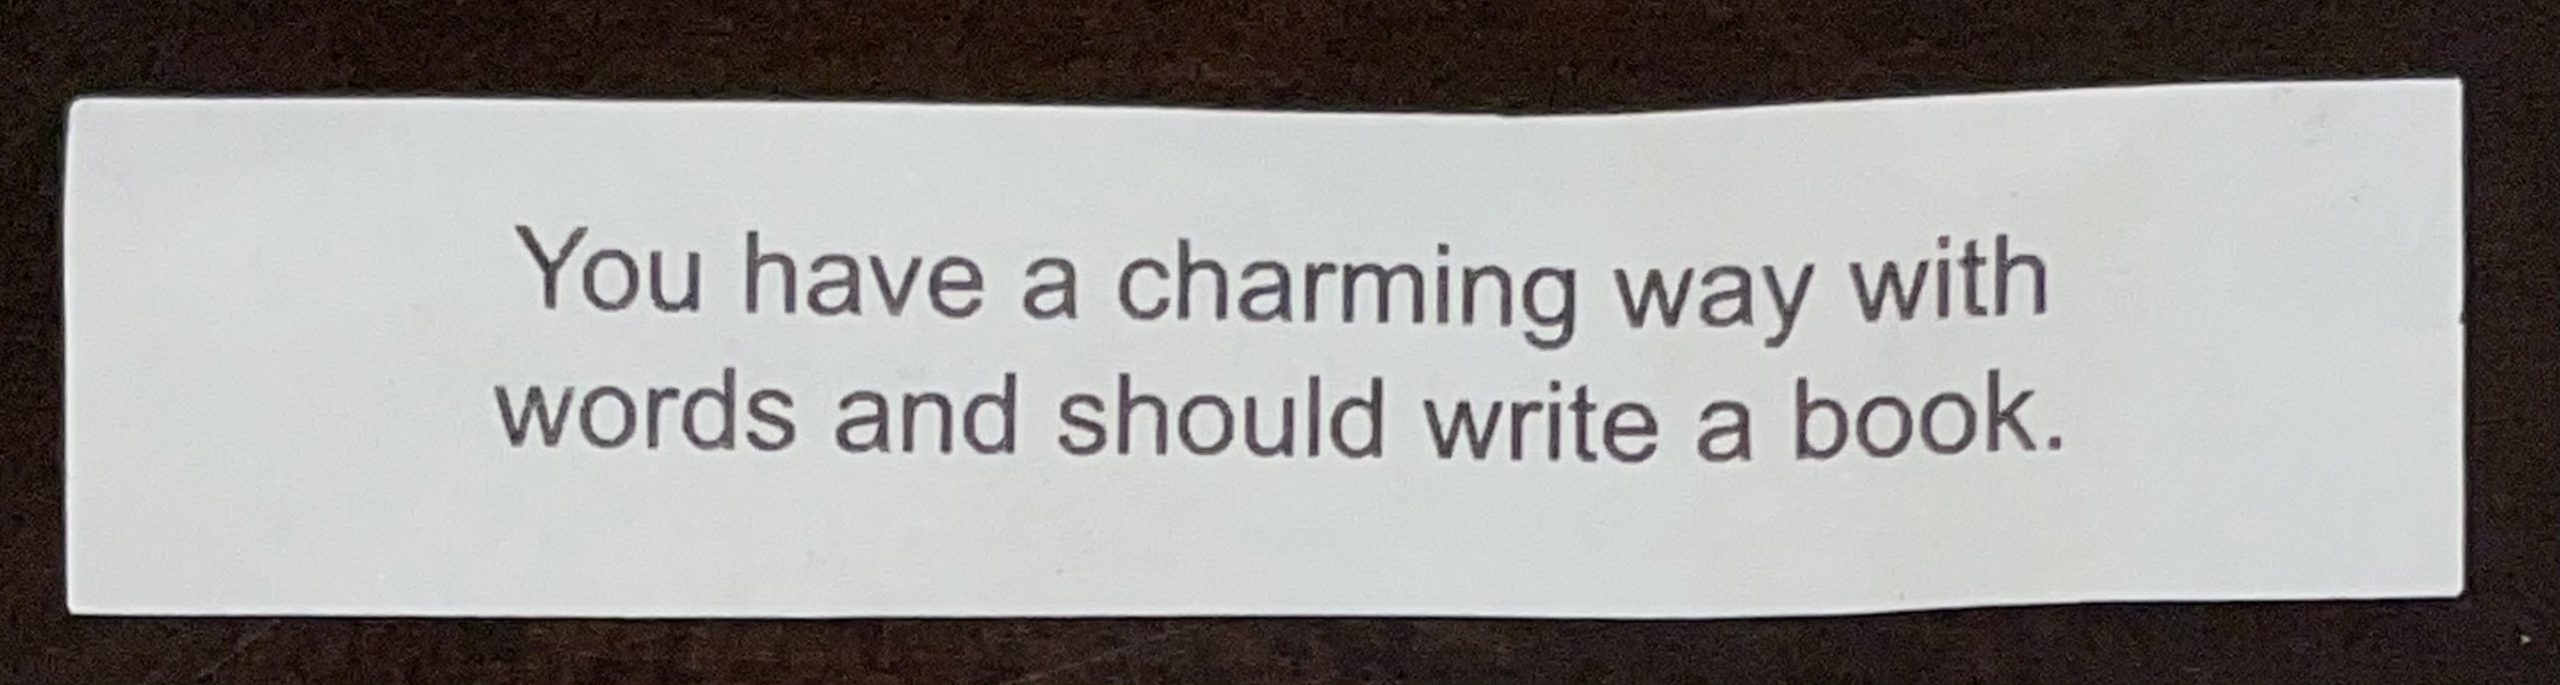 Fortune cookie with text, "You have a charming way with words and should write a book."